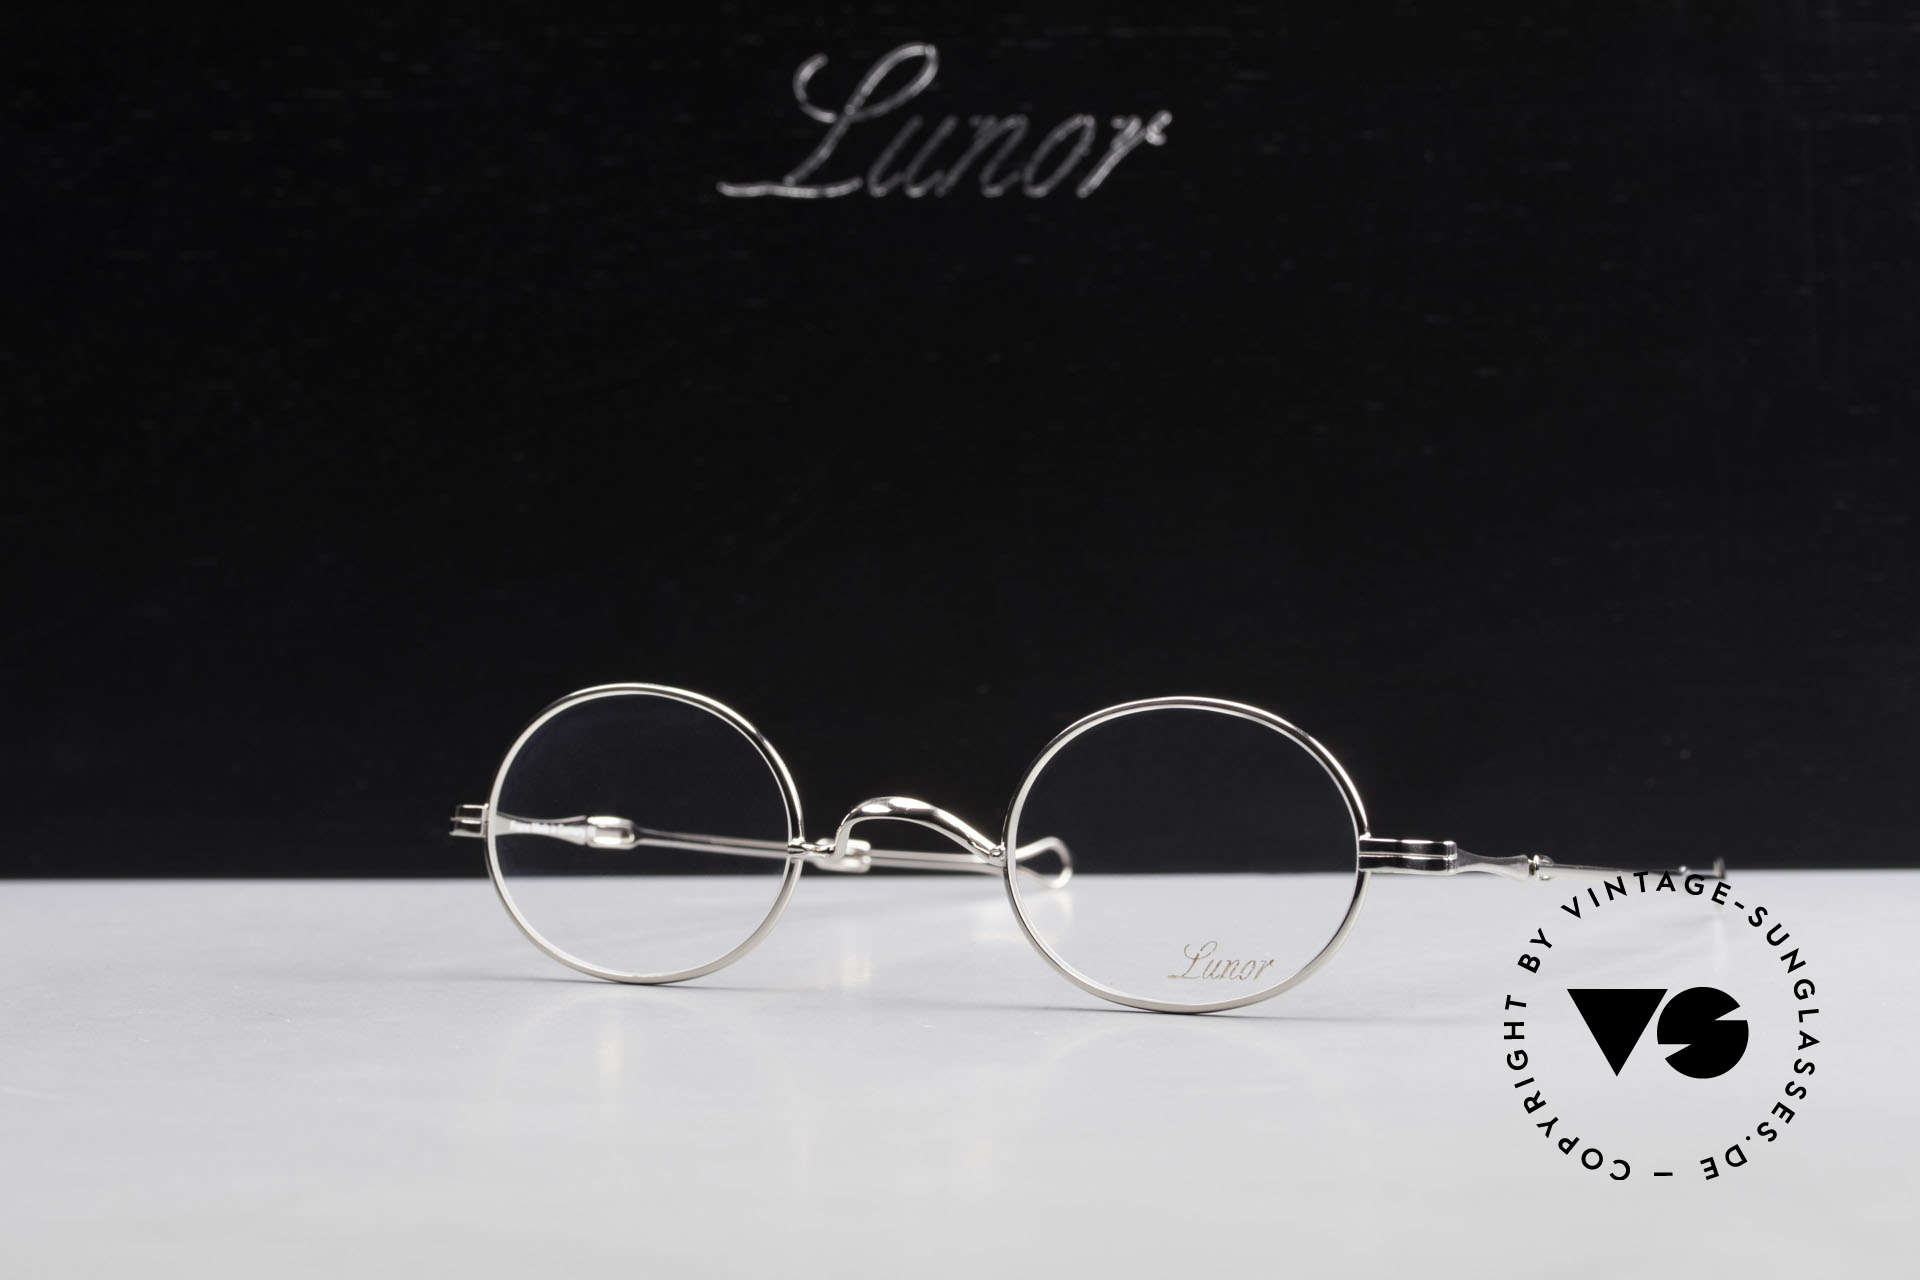 Lunor I 10 Telescopic Oval Eyeglasses Slide Temples, Size: small, Made for Men and Women